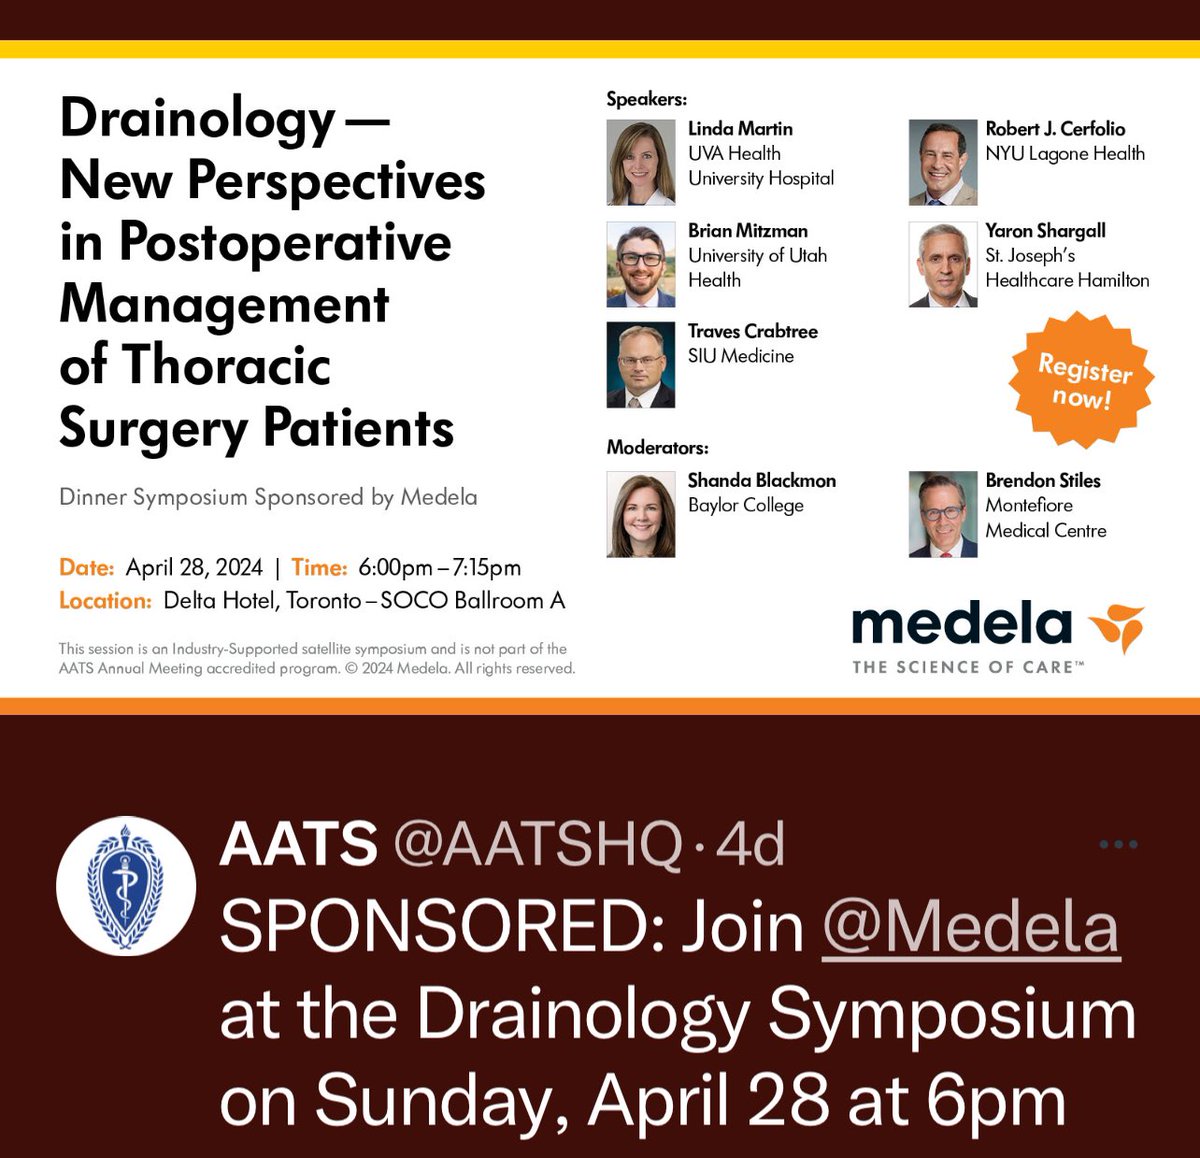 Looking forward to a lively discussion @AATSHQ @Medela_US @Cerf_MD @LindaMThoracic @BrendonStilesMD @BrianMitzman and others! This will no doubt be an epic debate!